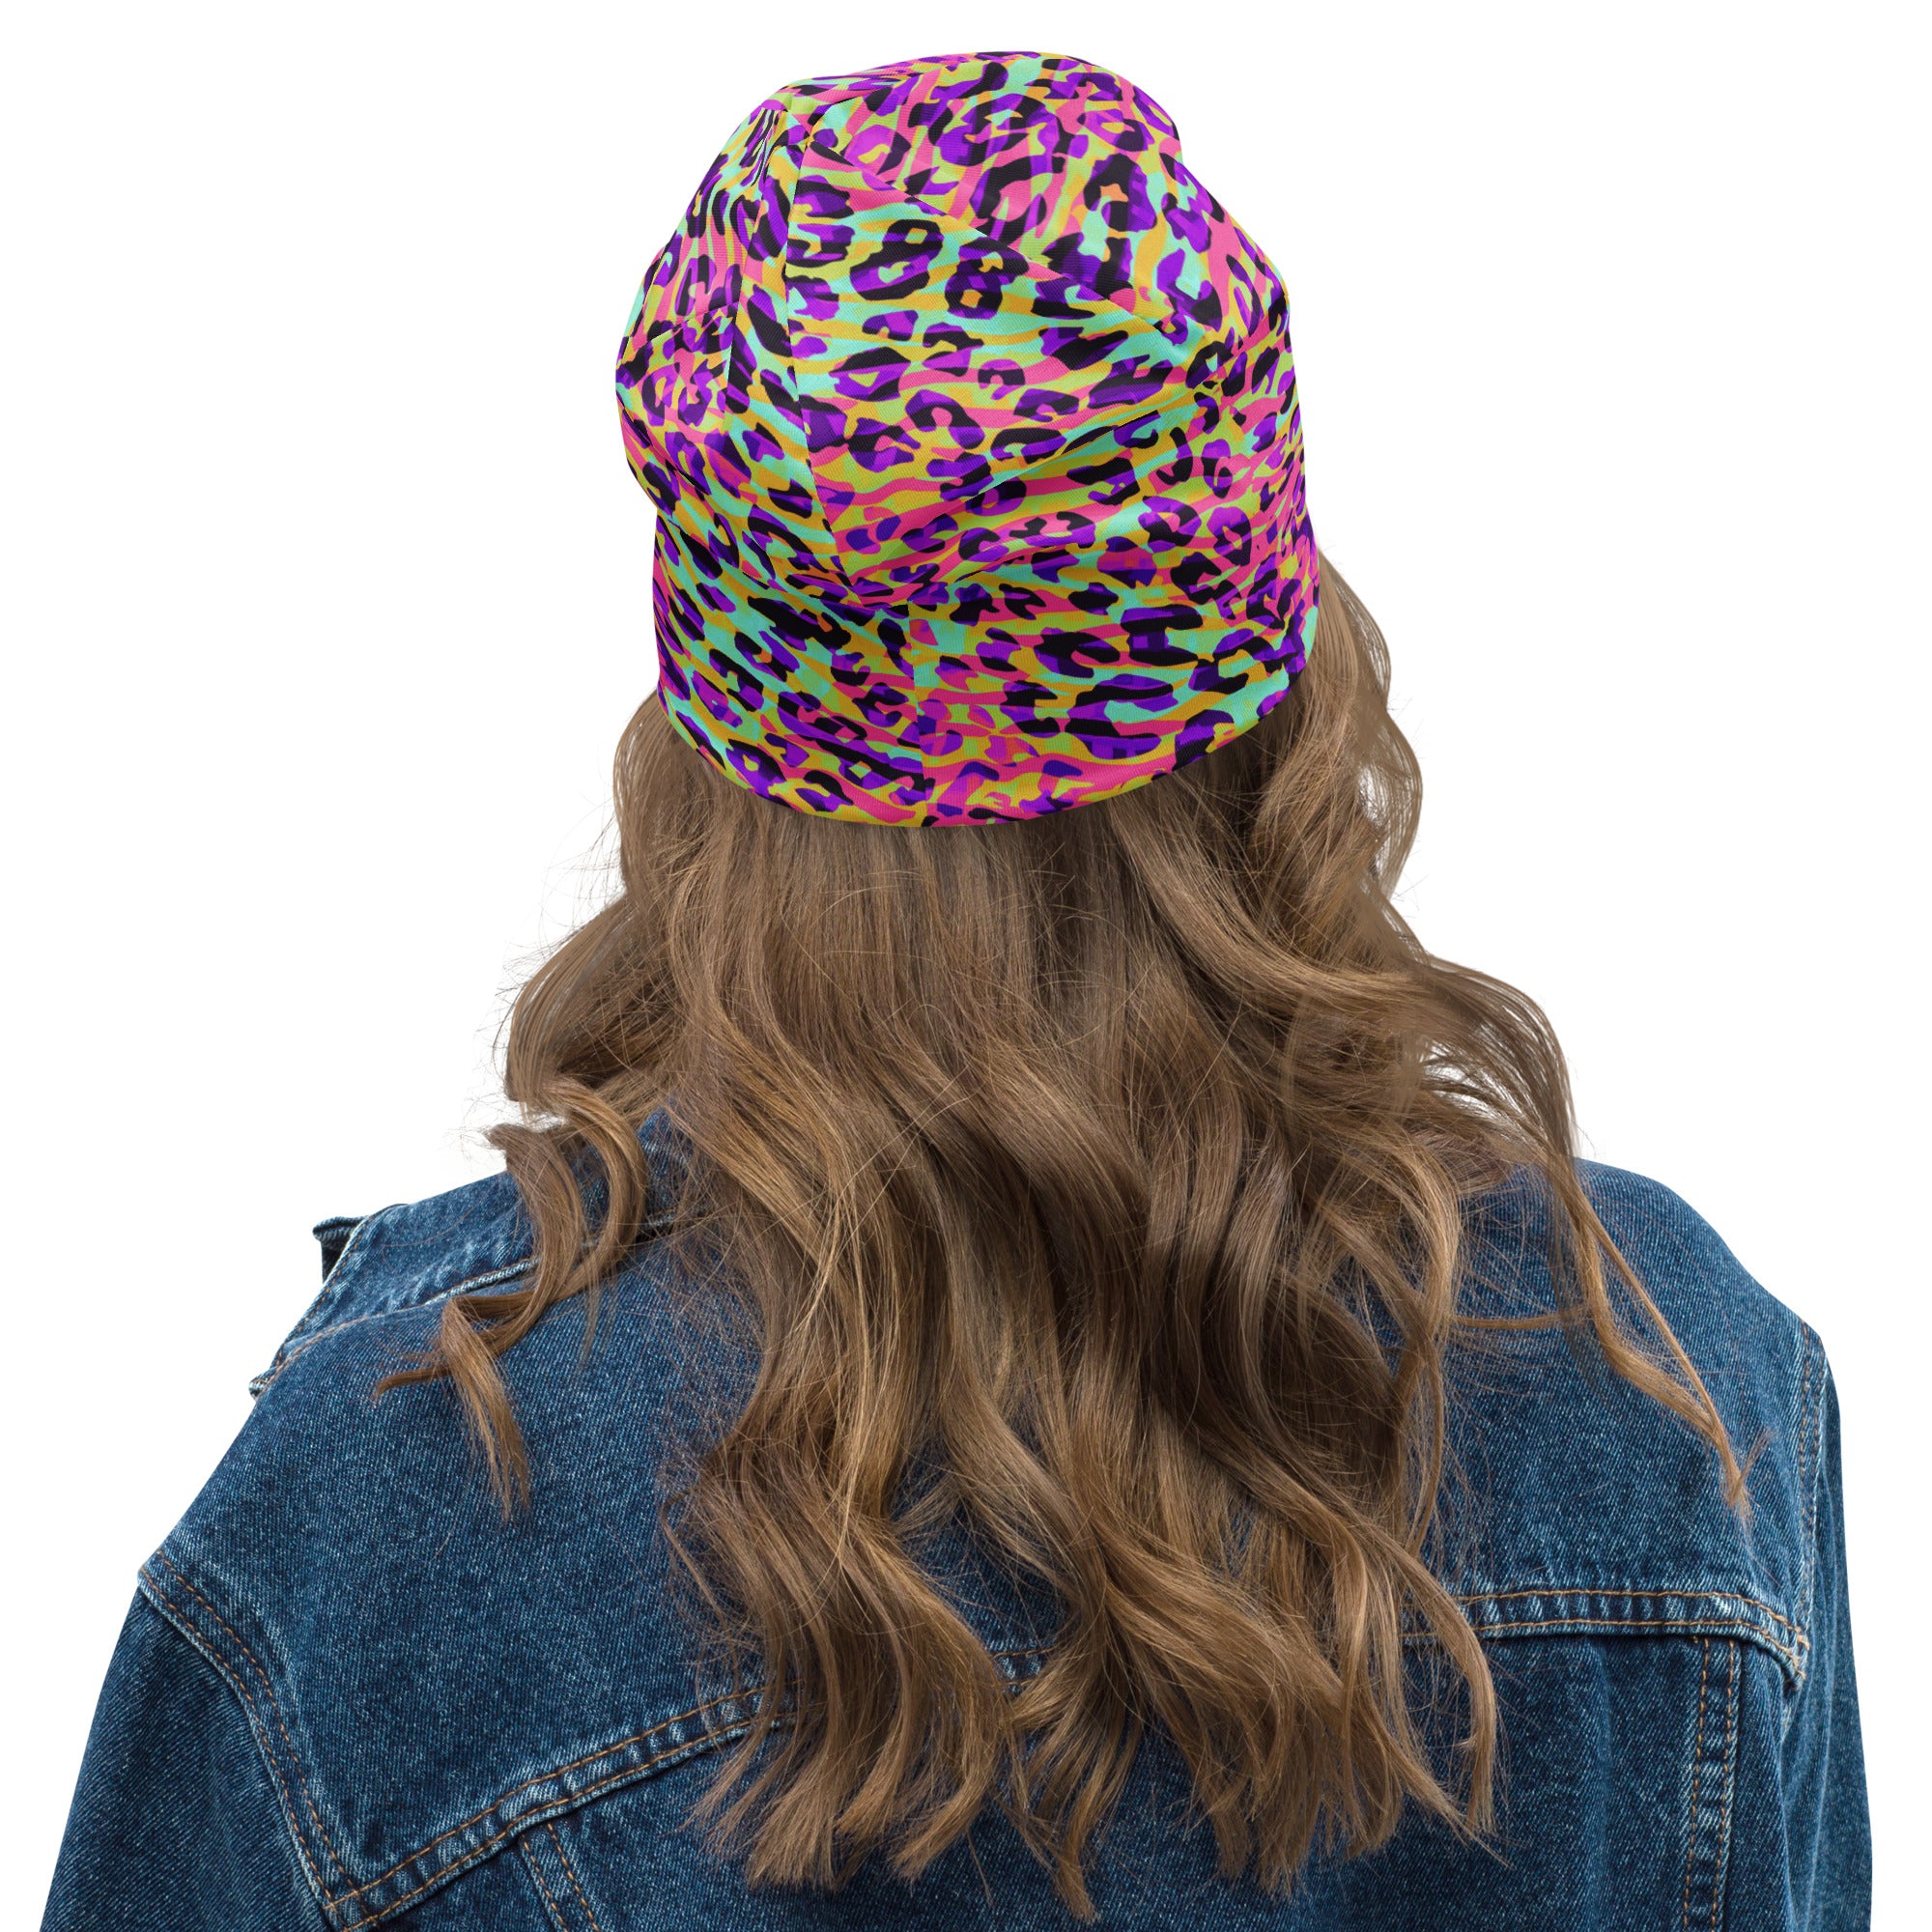 Beanie- Zebra and Leopard Print Pink with Yellow